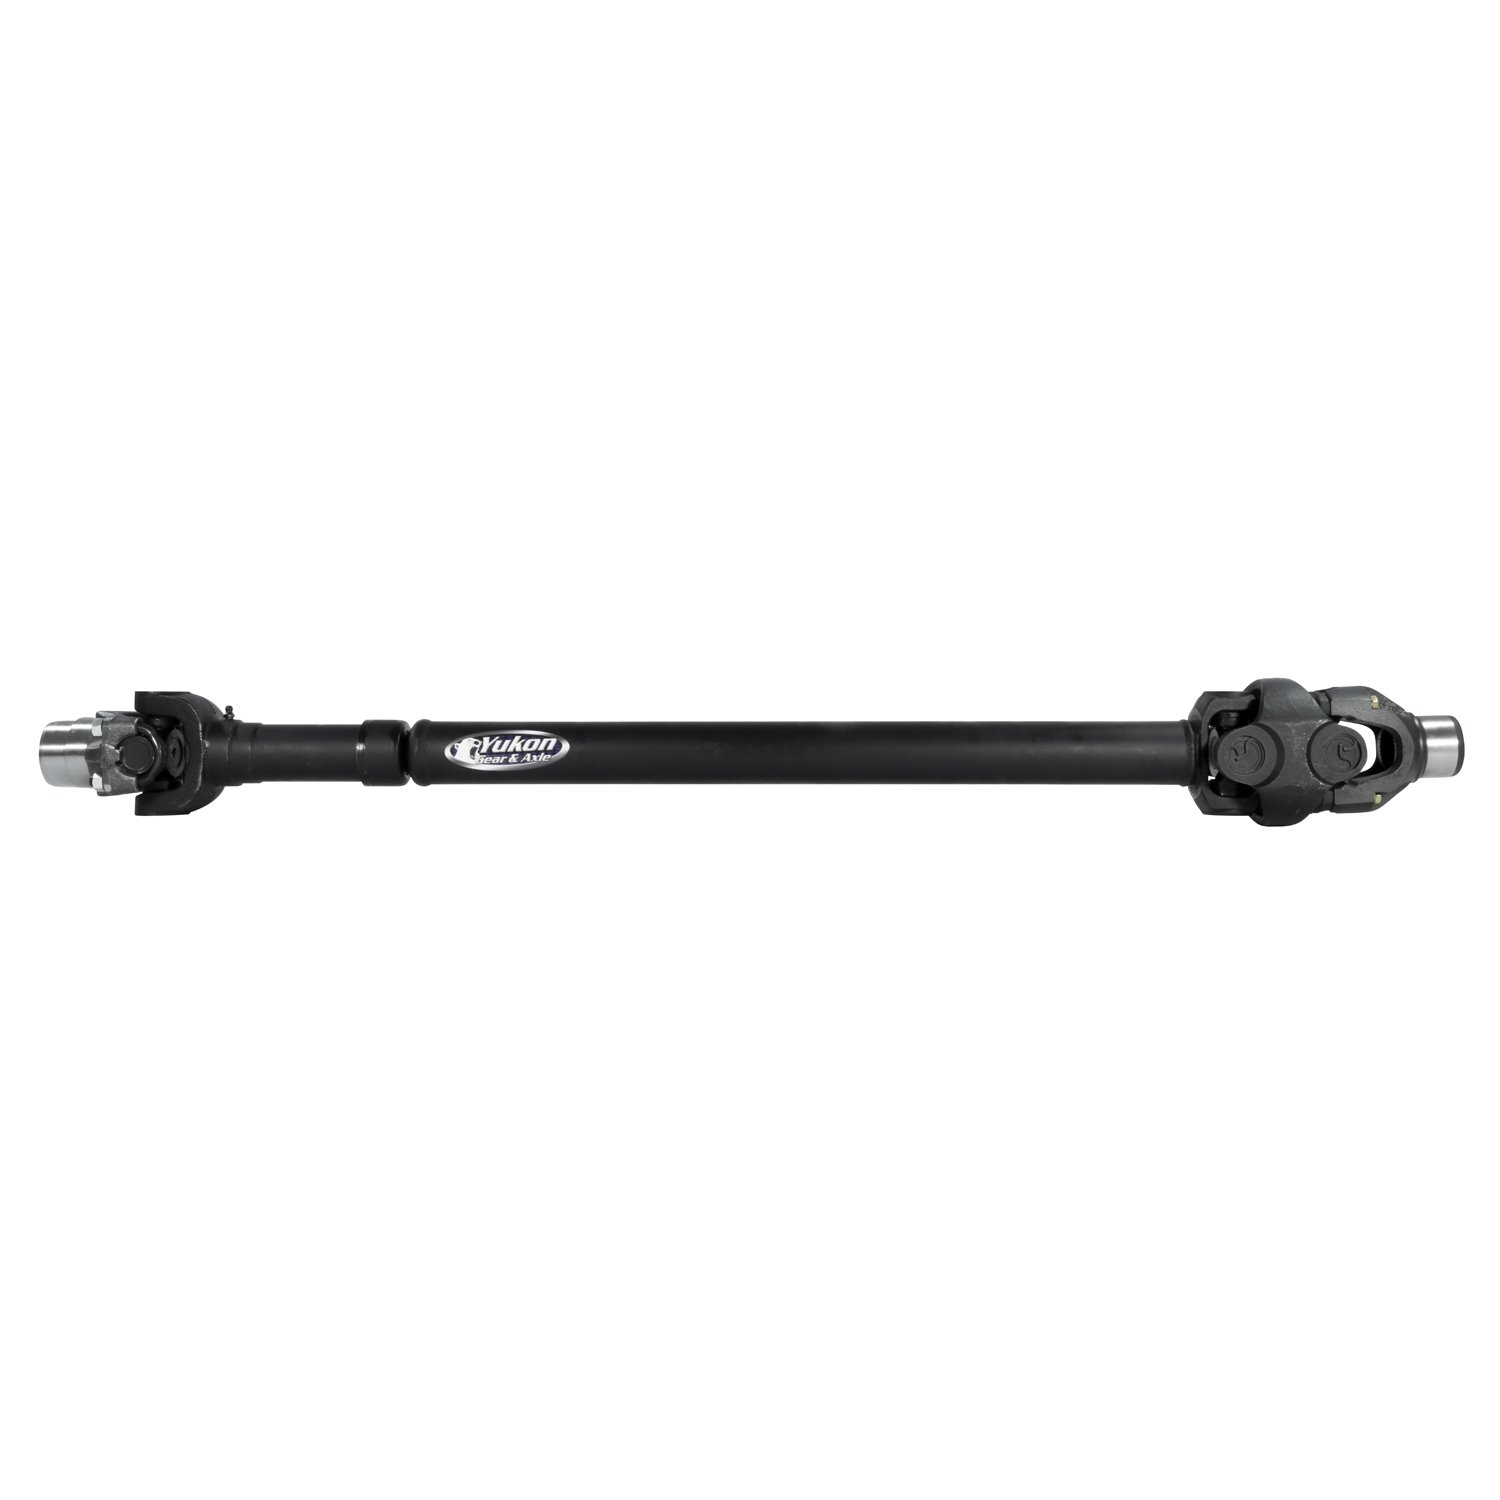 Performance Front Driveshaft Hd For 2018 Jeep Rubicon